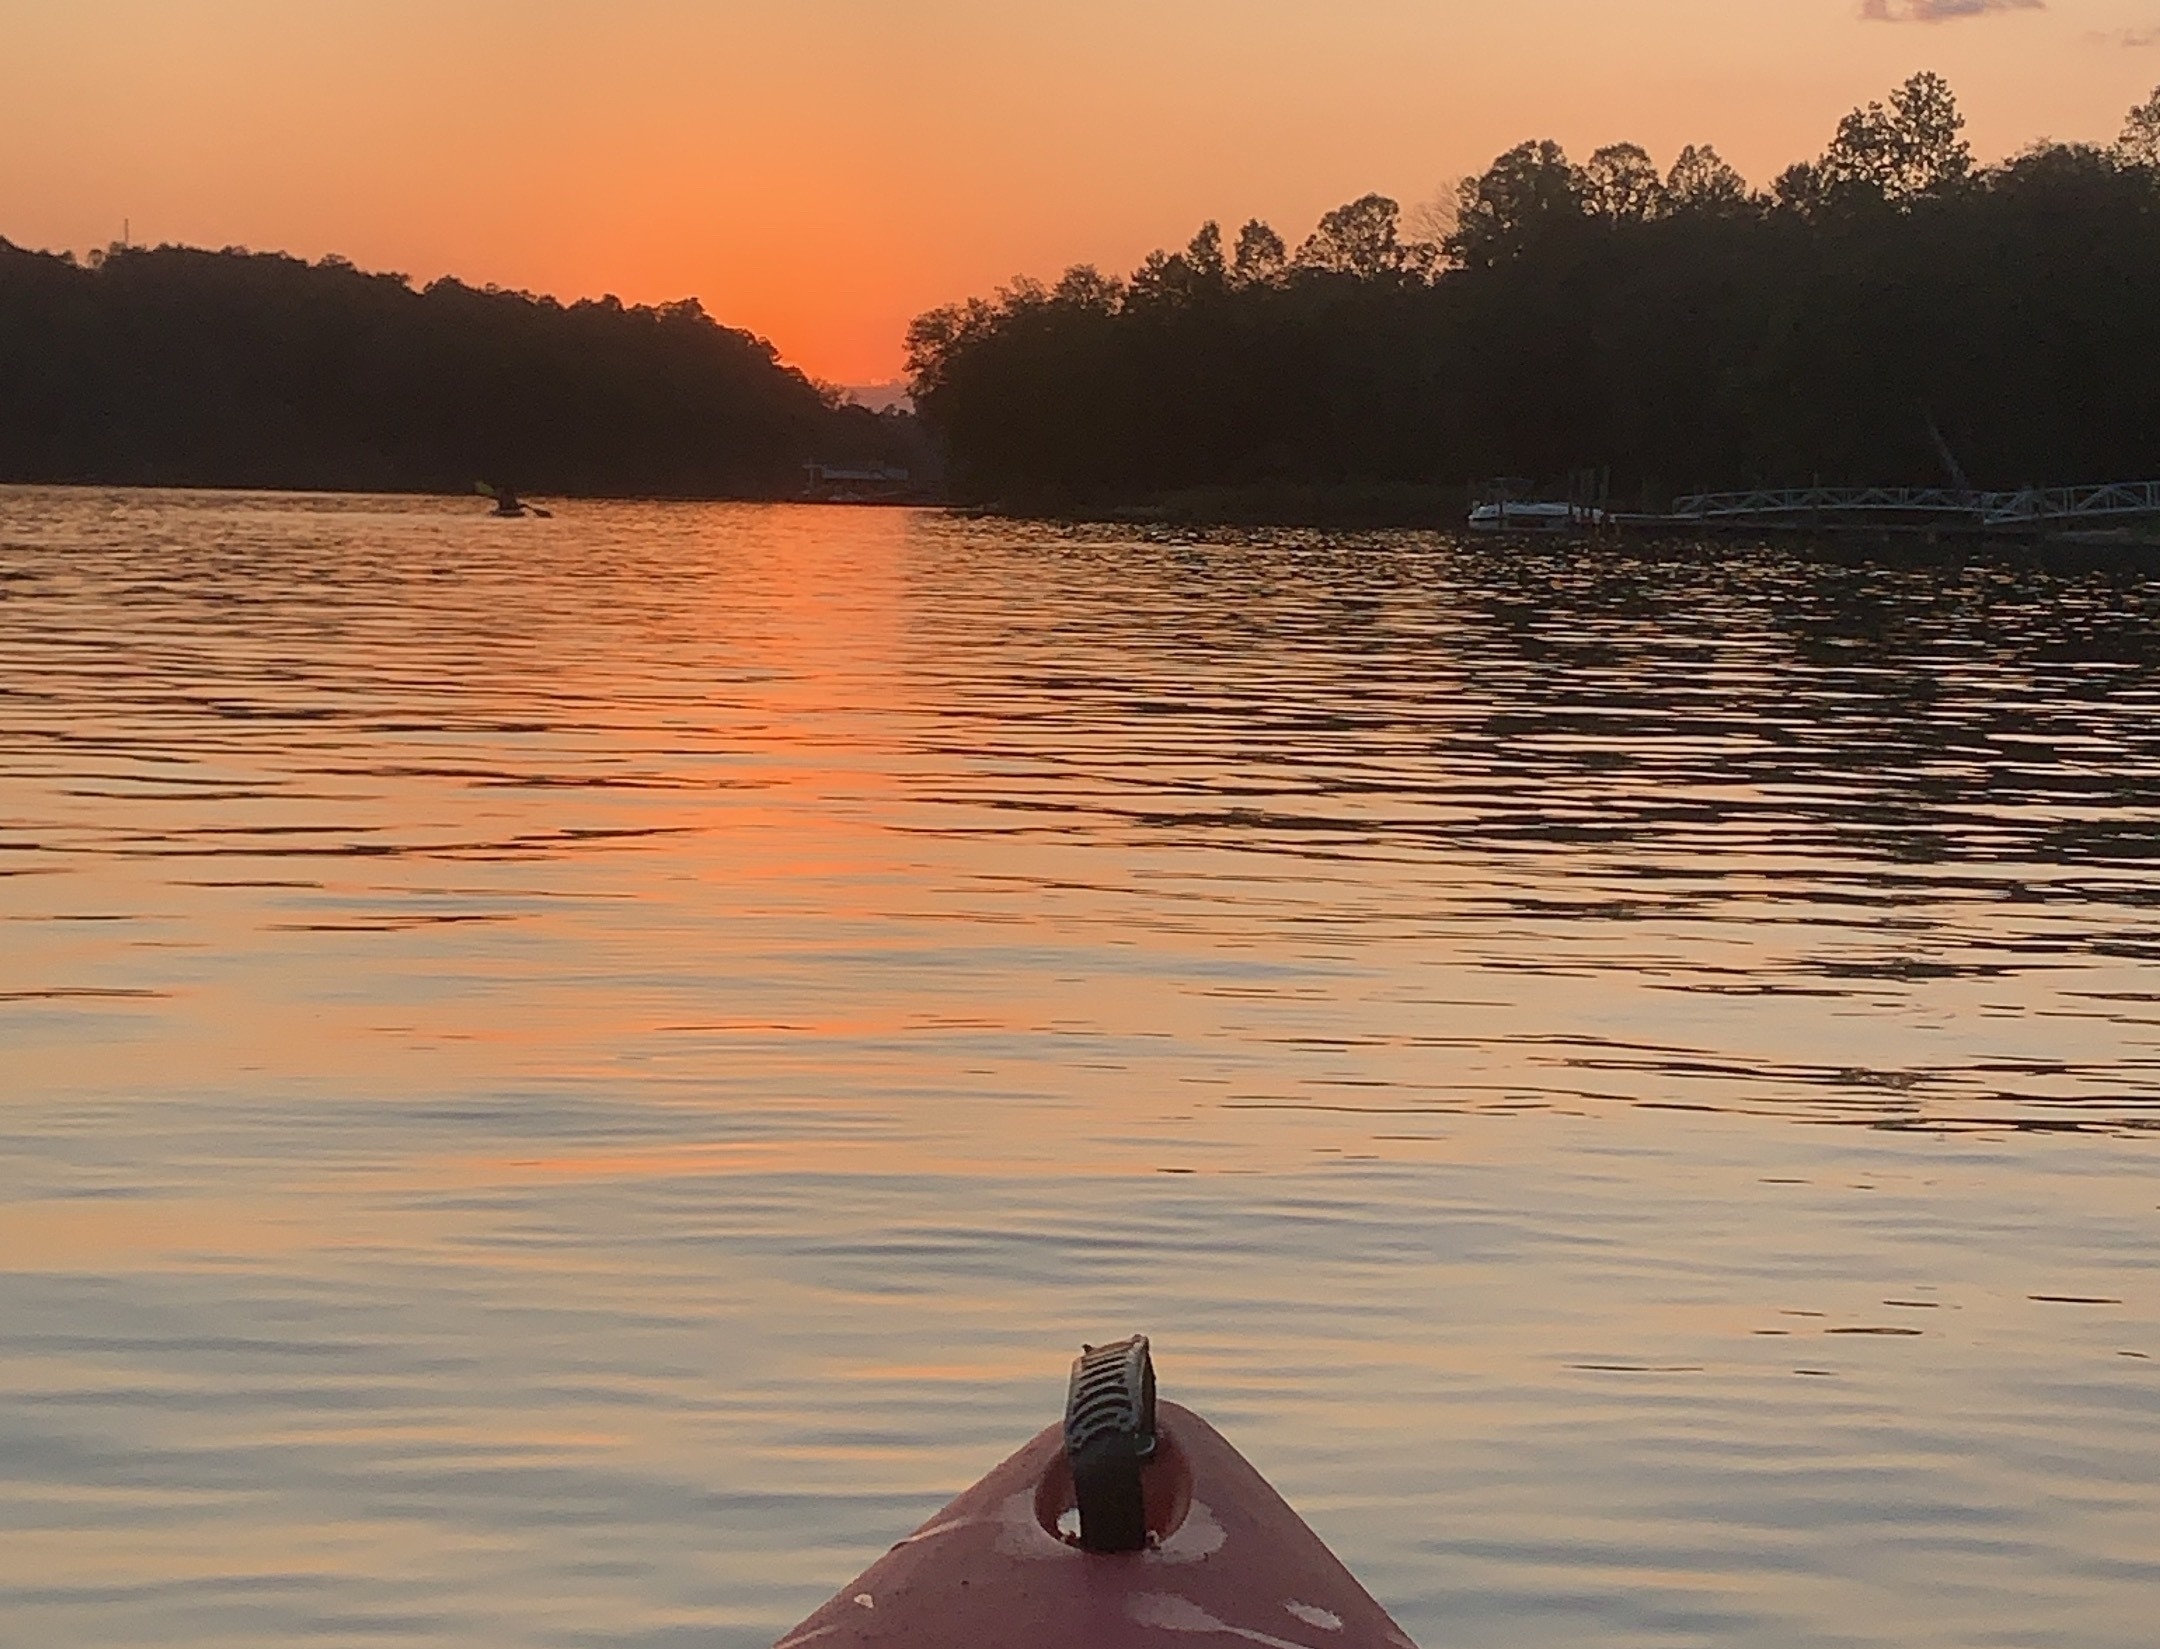 Awesome sunset and kayaking on the lake!